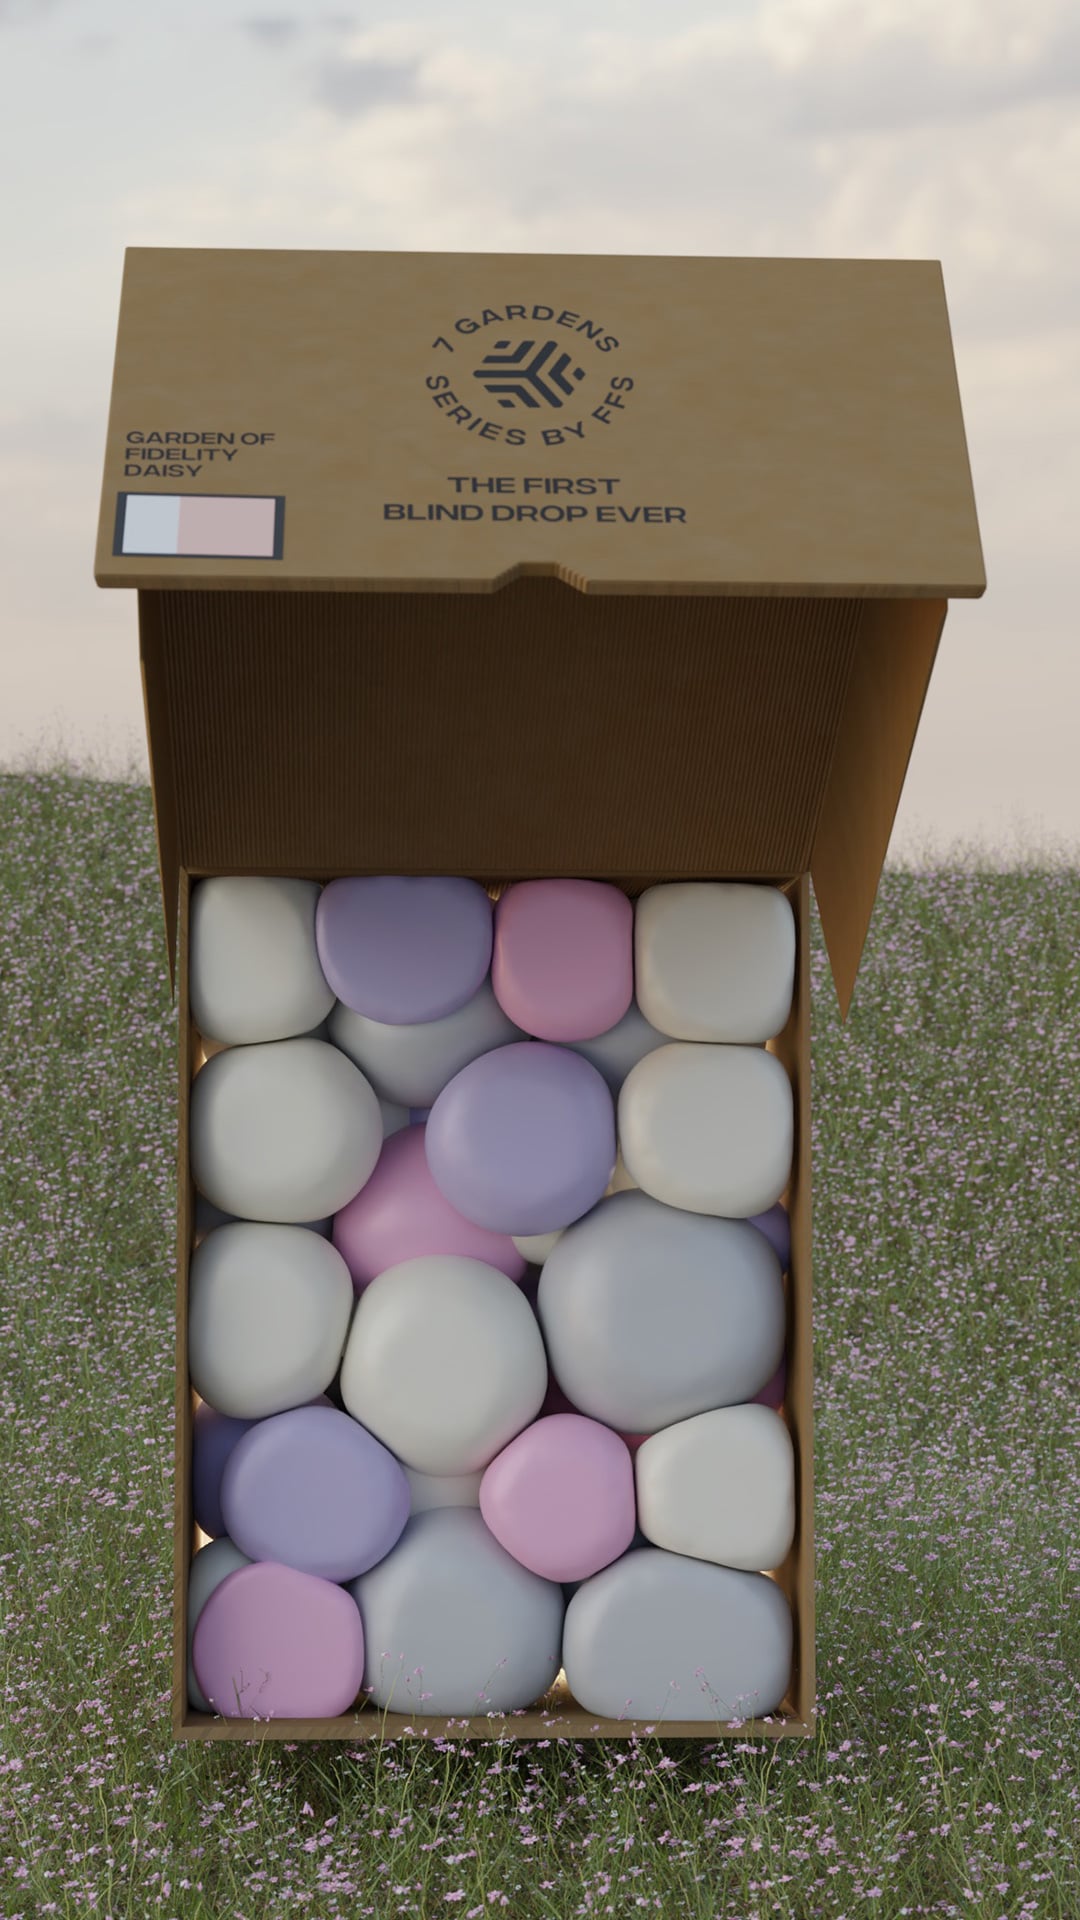 A 3D render from the Seed.One Daisy Blind Drop campaign showing an open shoe box on a meadow filled with pink, purple, grey and antique white bubbles 